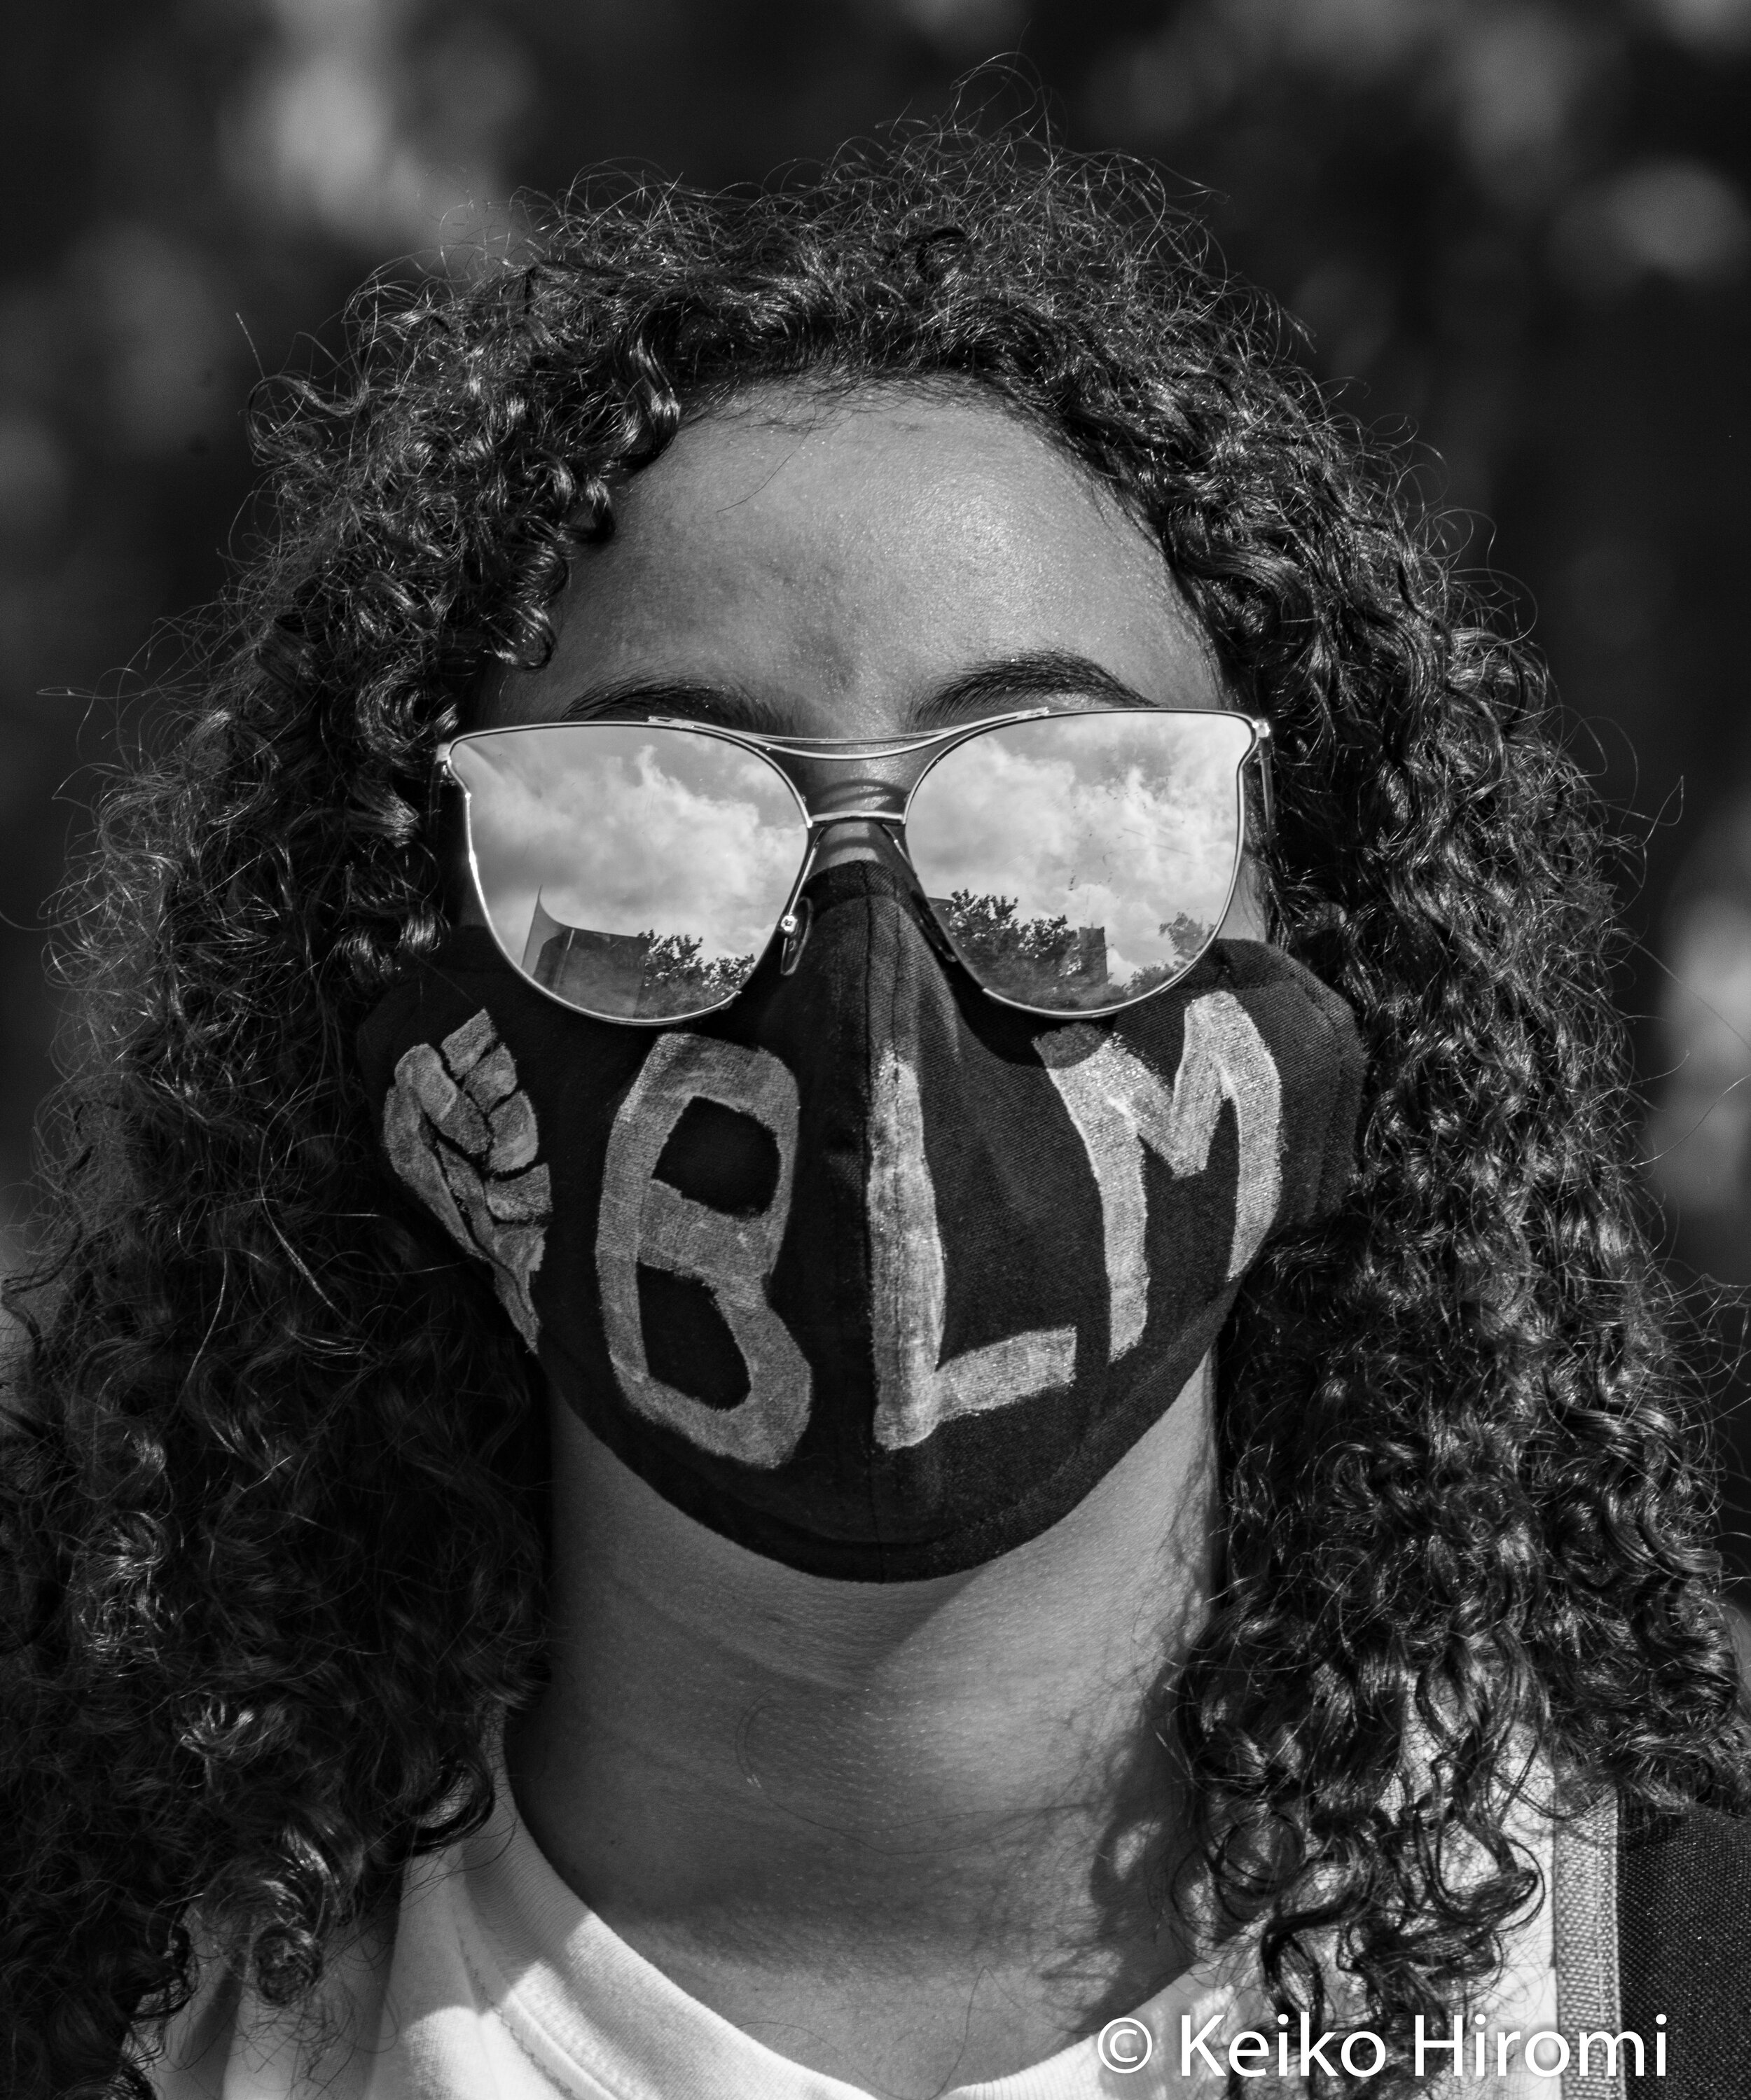  May 29, 2020, Boston, Massachusetts, USA: A protester wears a face mask "BLM" during a rally in response to deaths of George Floyd and against police brutality and racism at Peter's park in Boston, Massachusetts. 